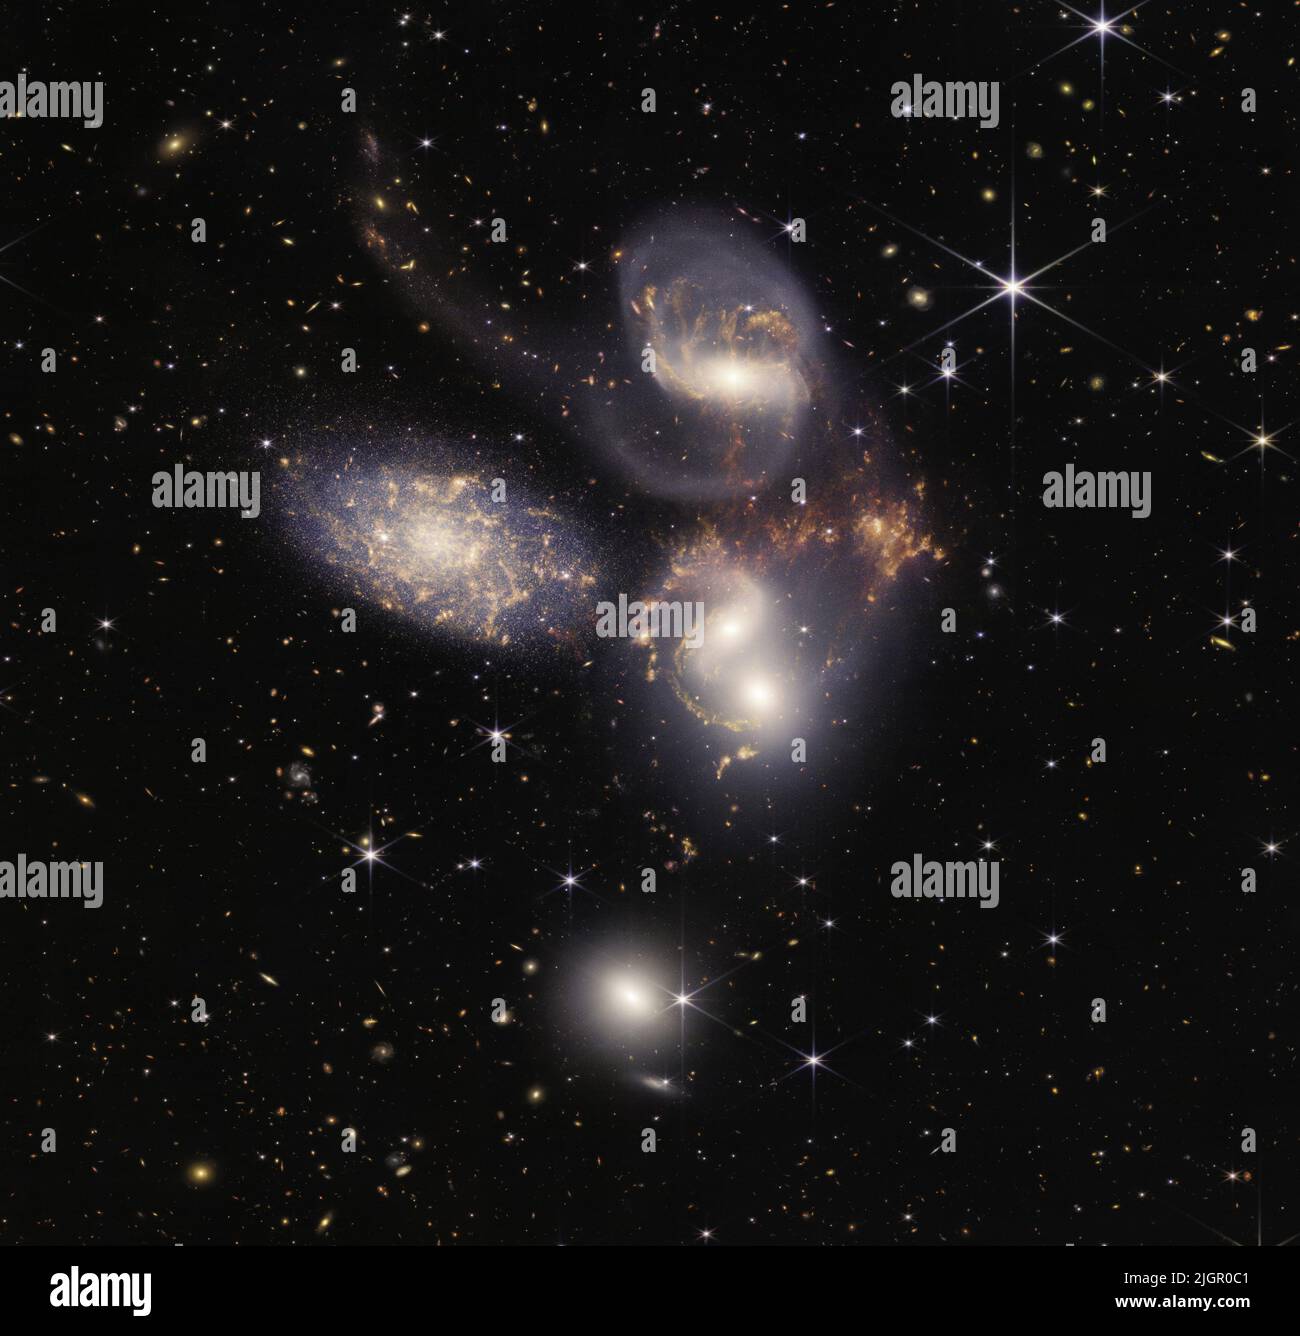 An enormous mosaic of Stephan's Quintet, released on July 12, 2022, is the largest image to date from NASA's James Webb Space Telescope, covering about one-fifth of the Moon's diameter. It contains over 150 million pixels and is constructed from almost 1,000 separate image files. The visual grouping of five galaxies was captured by Webb's Near-Infrared Camera (NIRCam) and Mid-Infrared Instrument (MIRI). This composite NIRCam-MIRI image uses two of the three MIRI filters to best show and differentiate the hot dust and structure within the galaxy. MIRI sees a distinct difference in color between Stock Photo